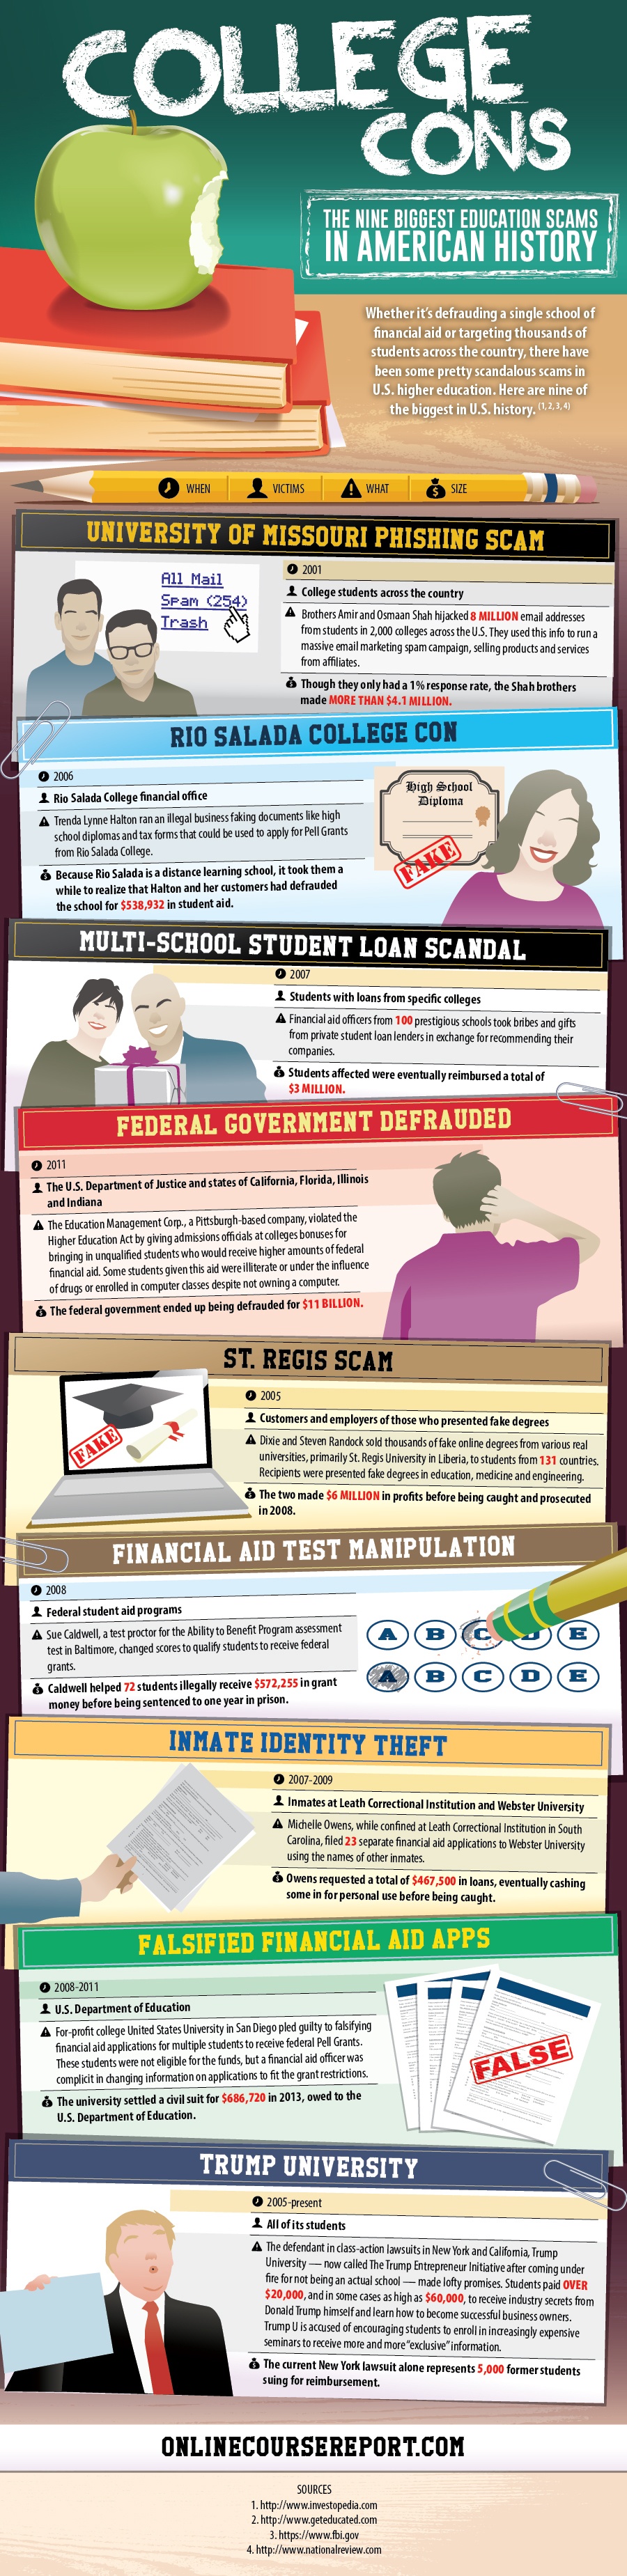 College Cons: The Nine Biggest Education Scams in American History Infographic